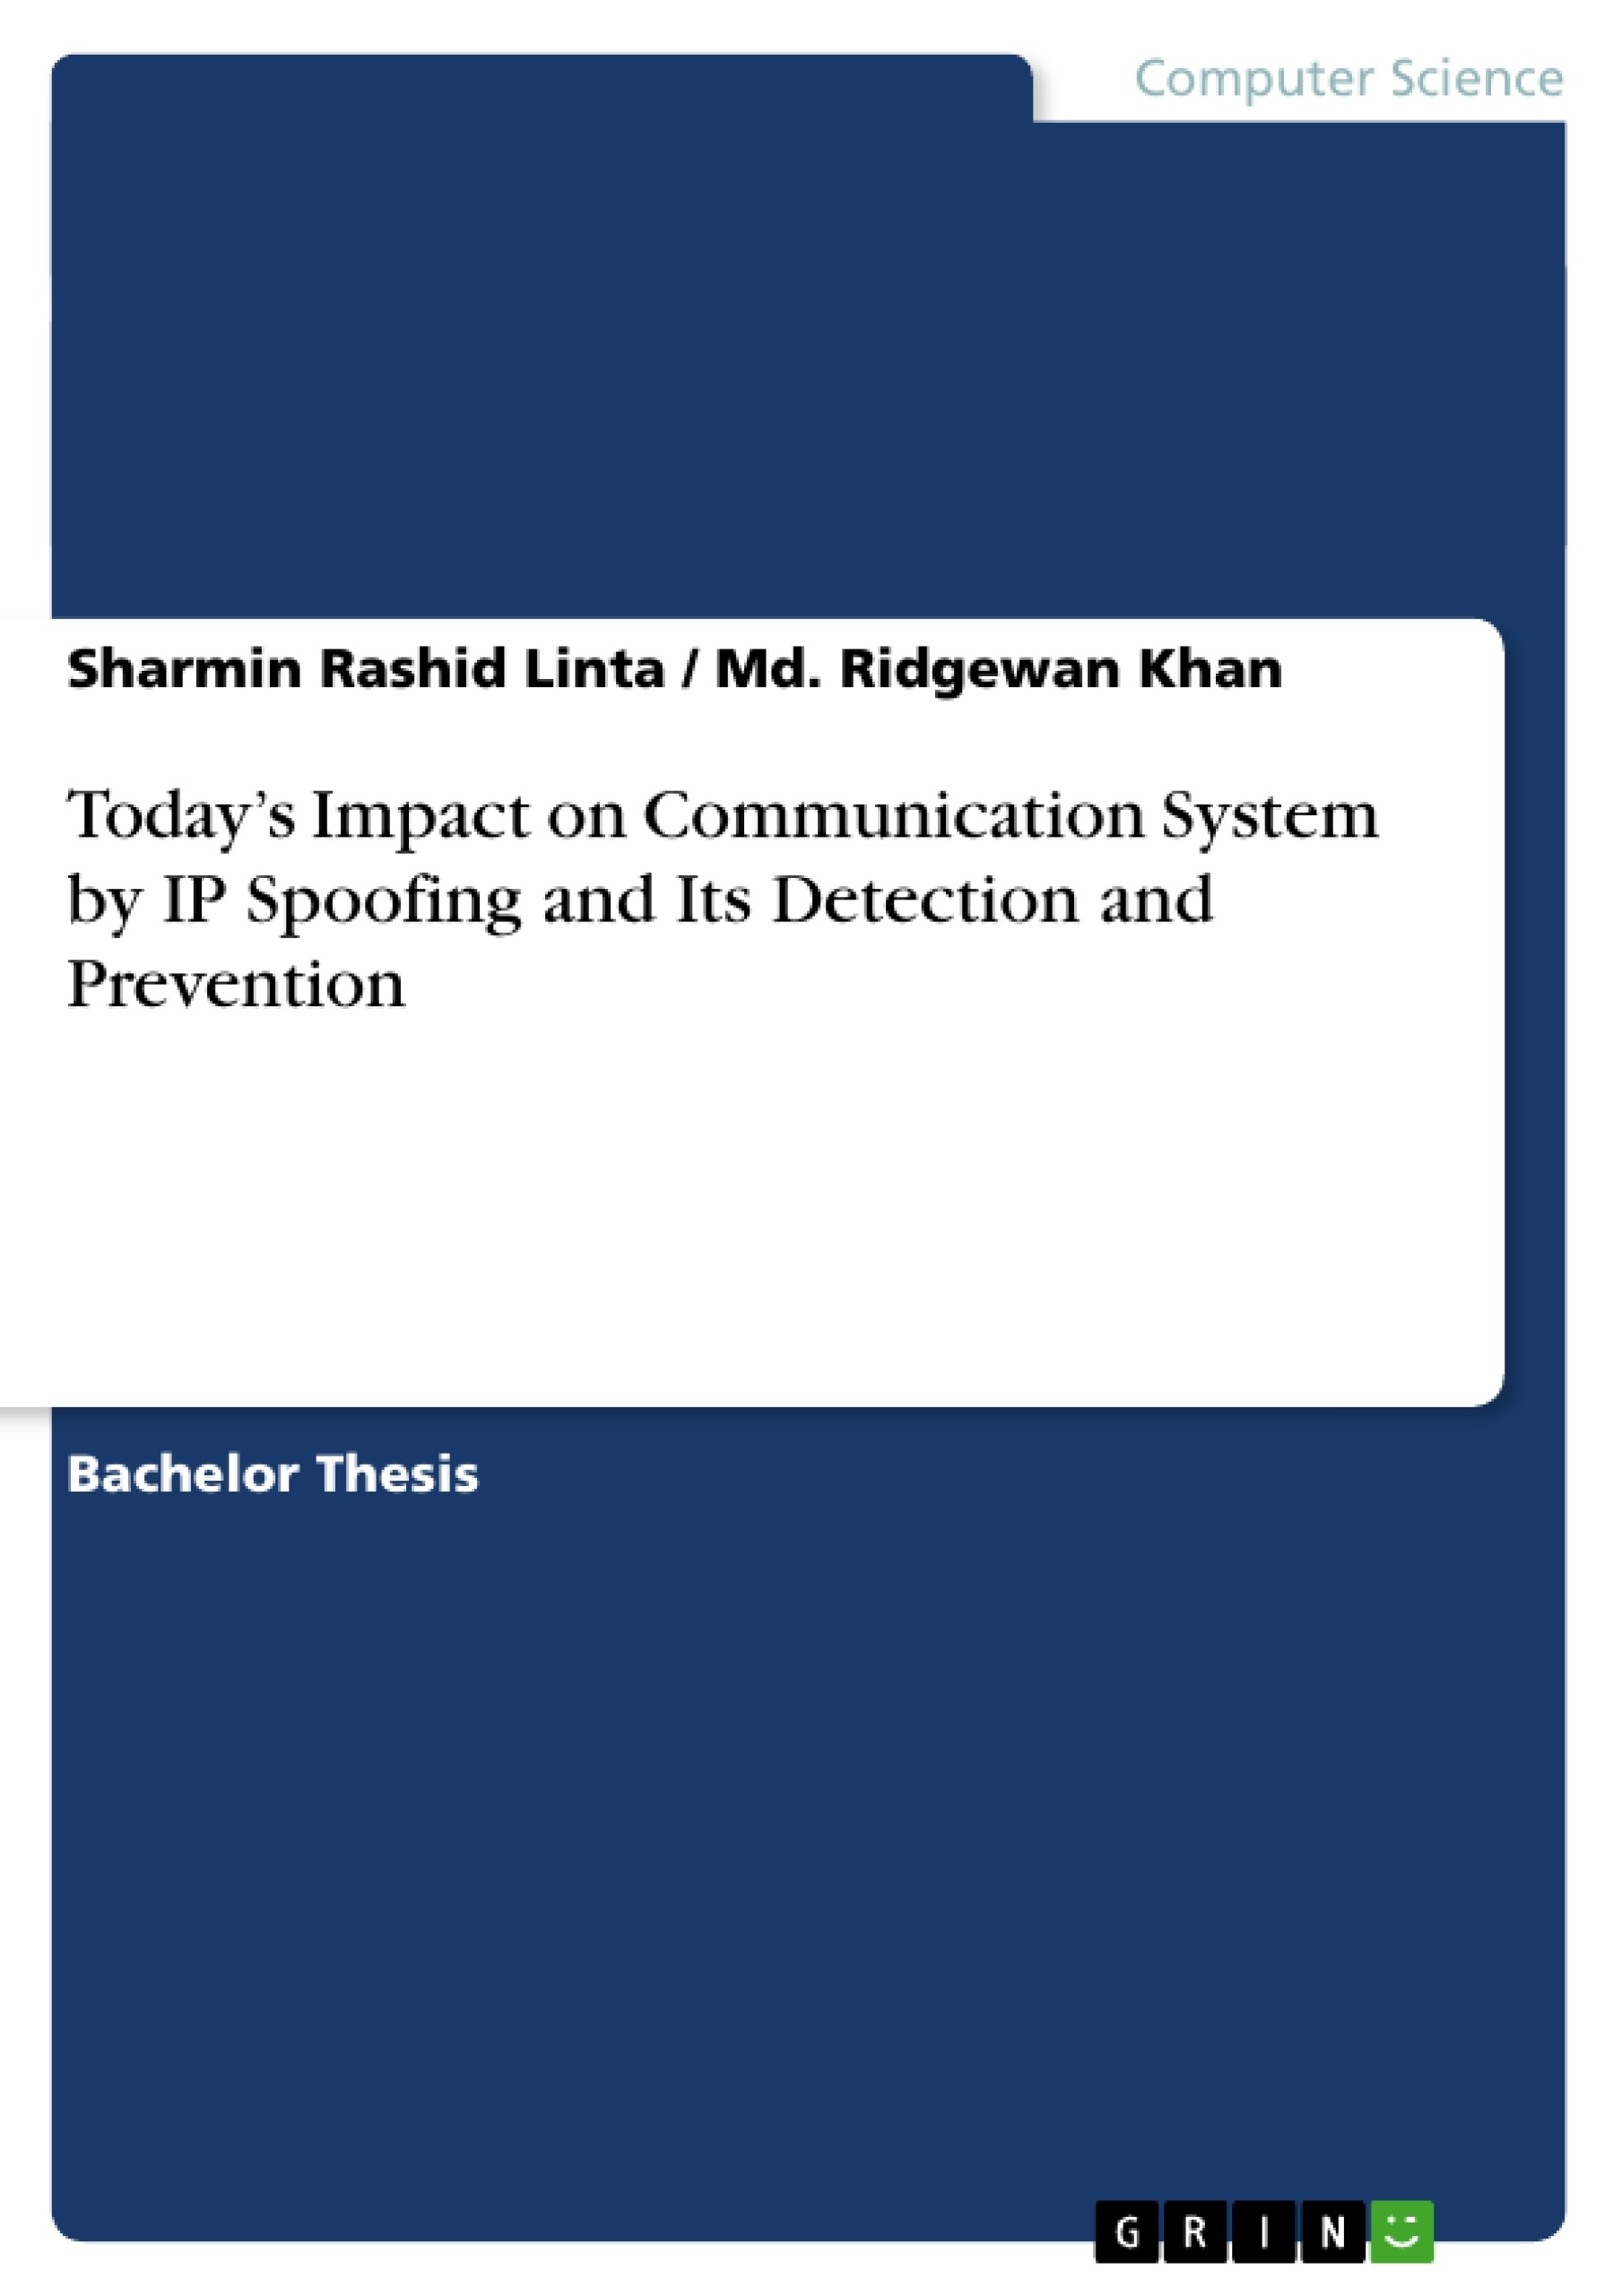 Titel: Today’s Impact on Communication System by IP Spoofing and Its Detection and Prevention